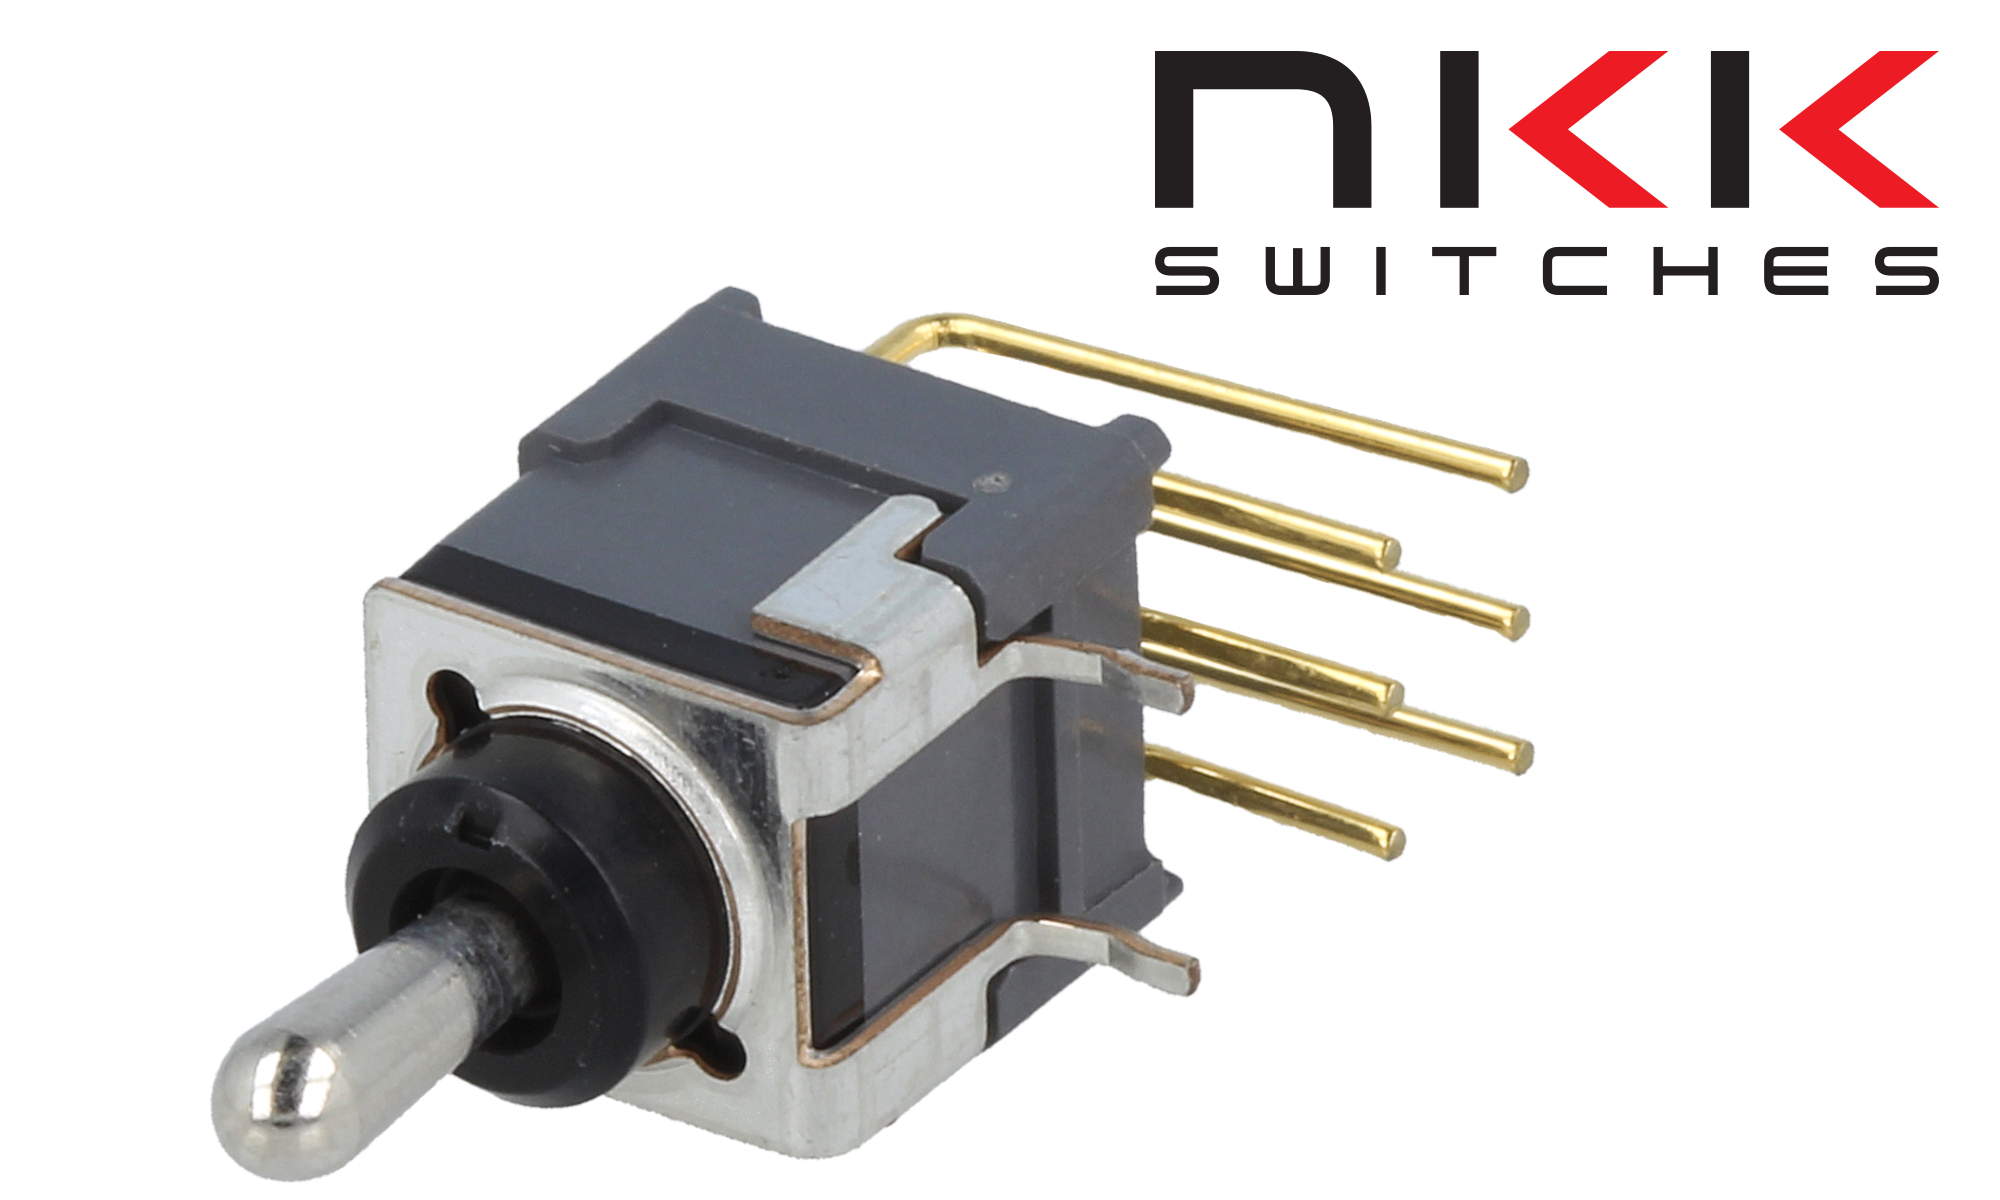 Toggle switches by NKK Switches